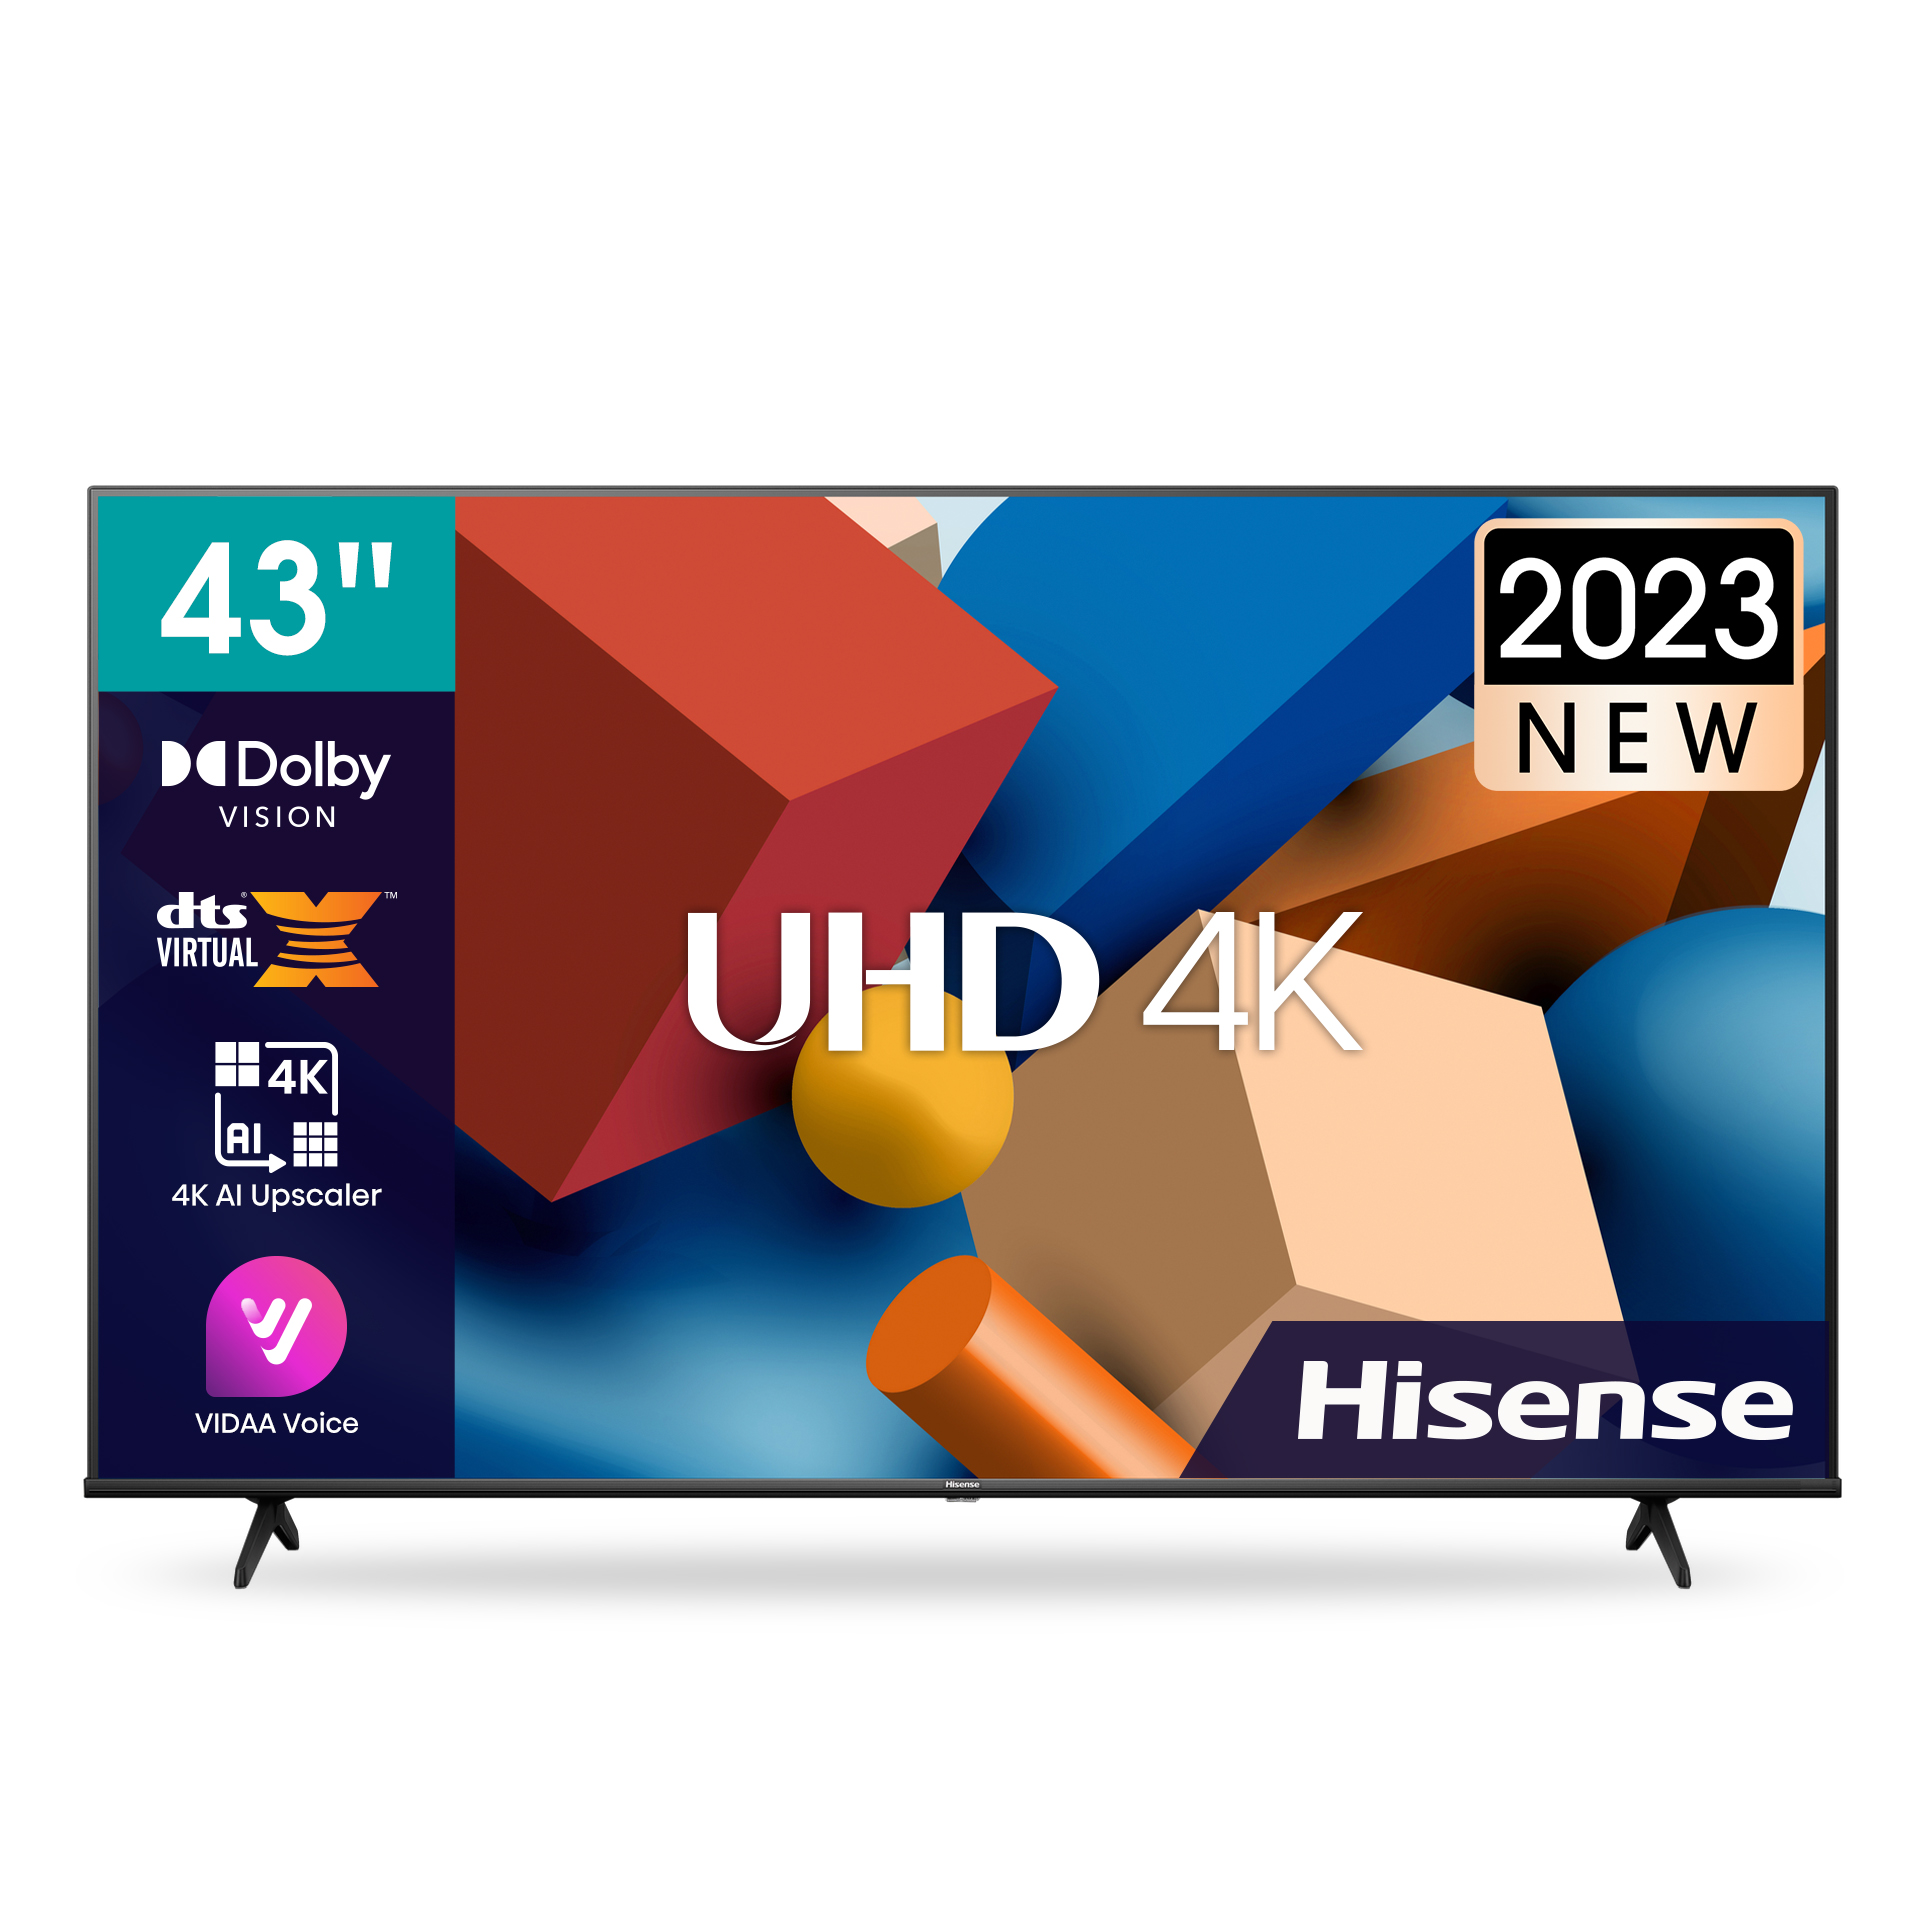 How To Tell if a Hisense TV Has Bluetooth